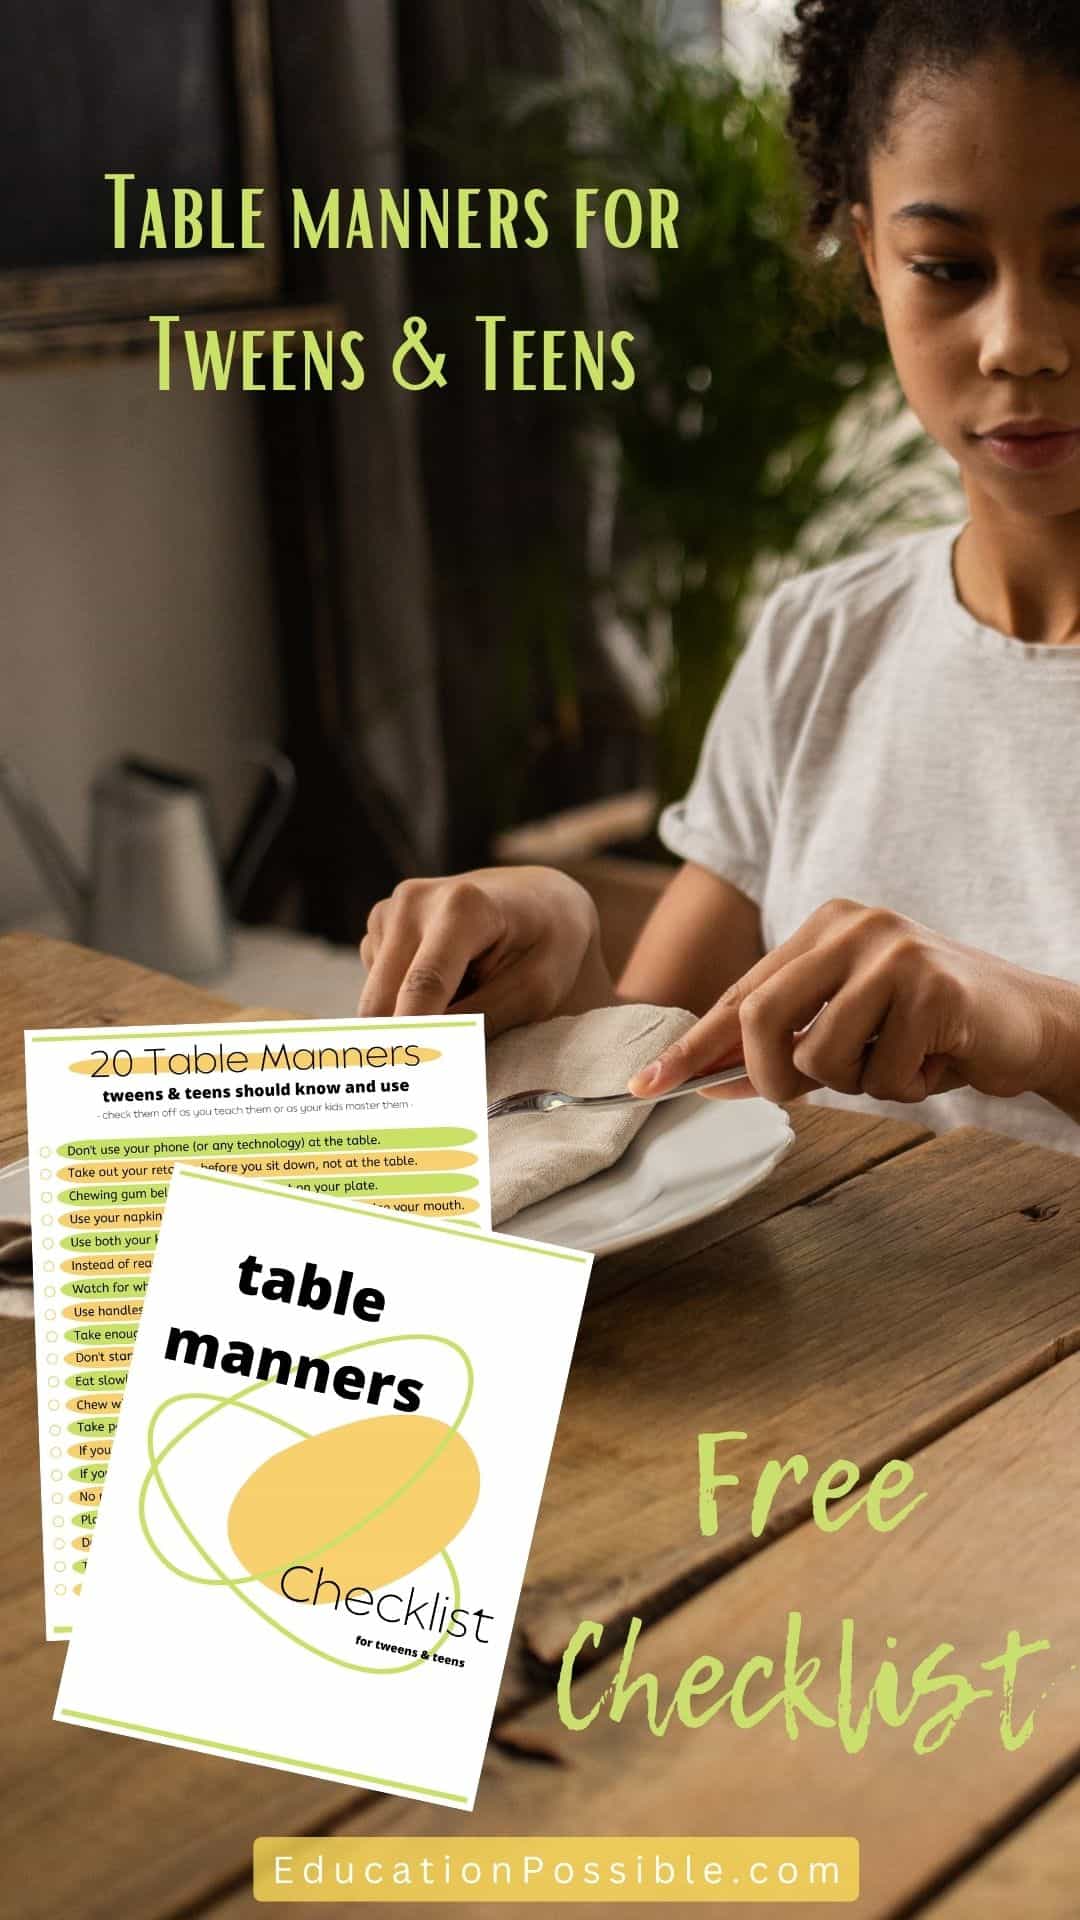 20 Important Table Manners for Teens and tweens